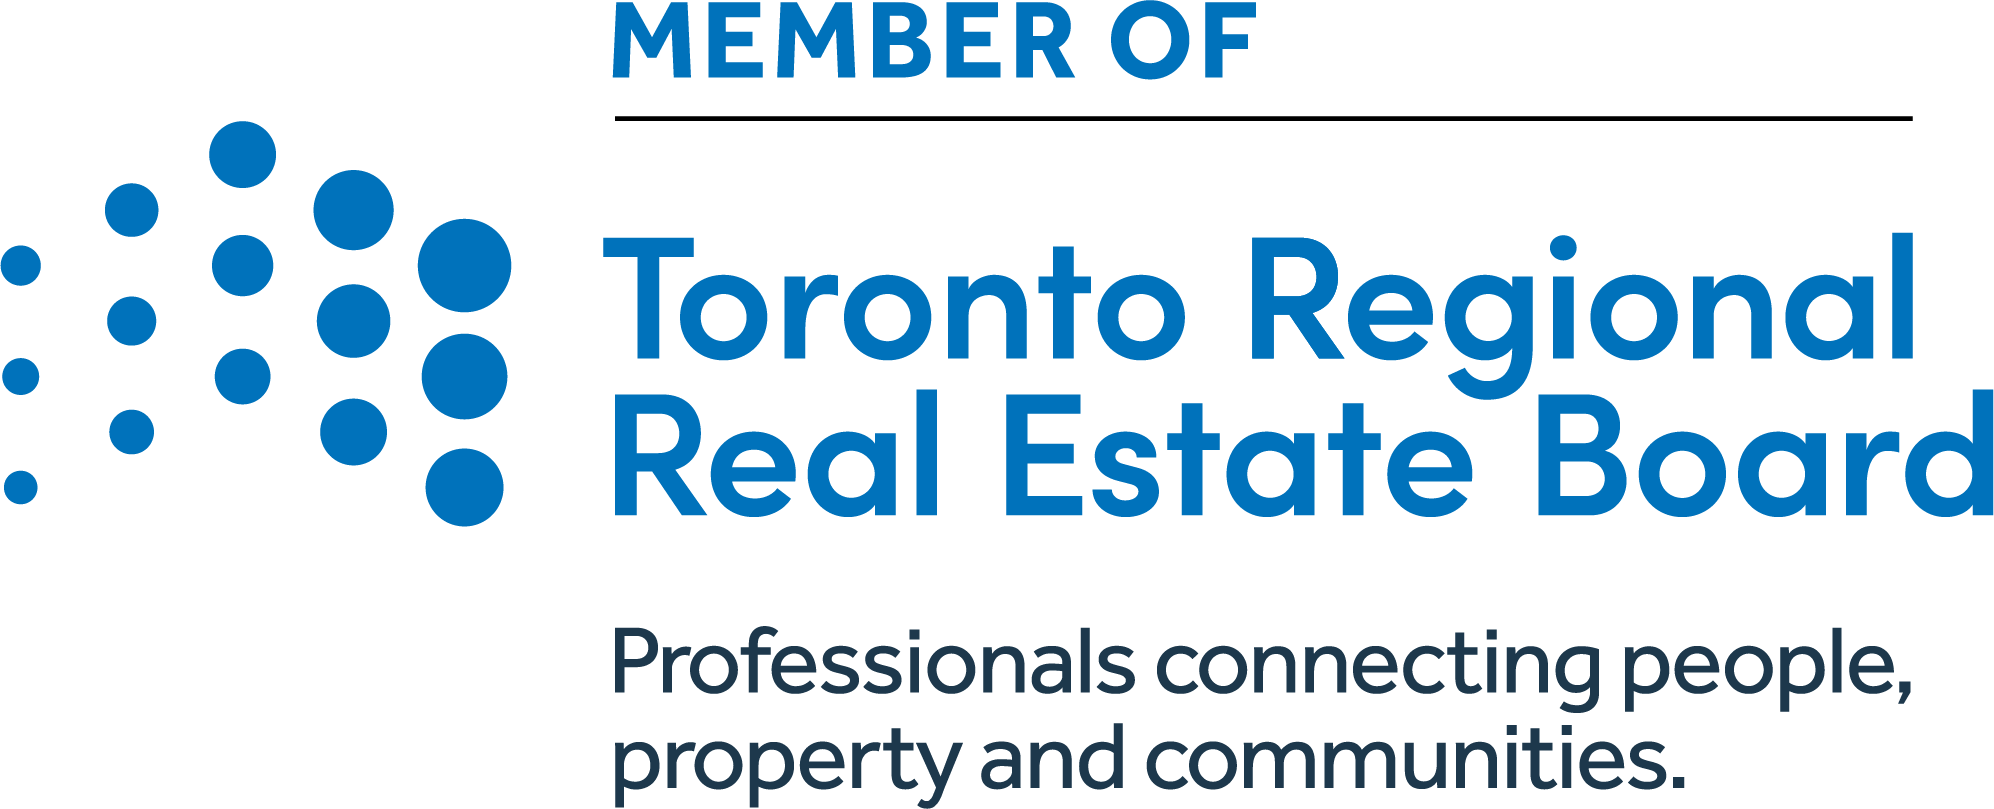 Member of Toronto Regional Real Estate Board: Professionals connecting people, properties and communities.